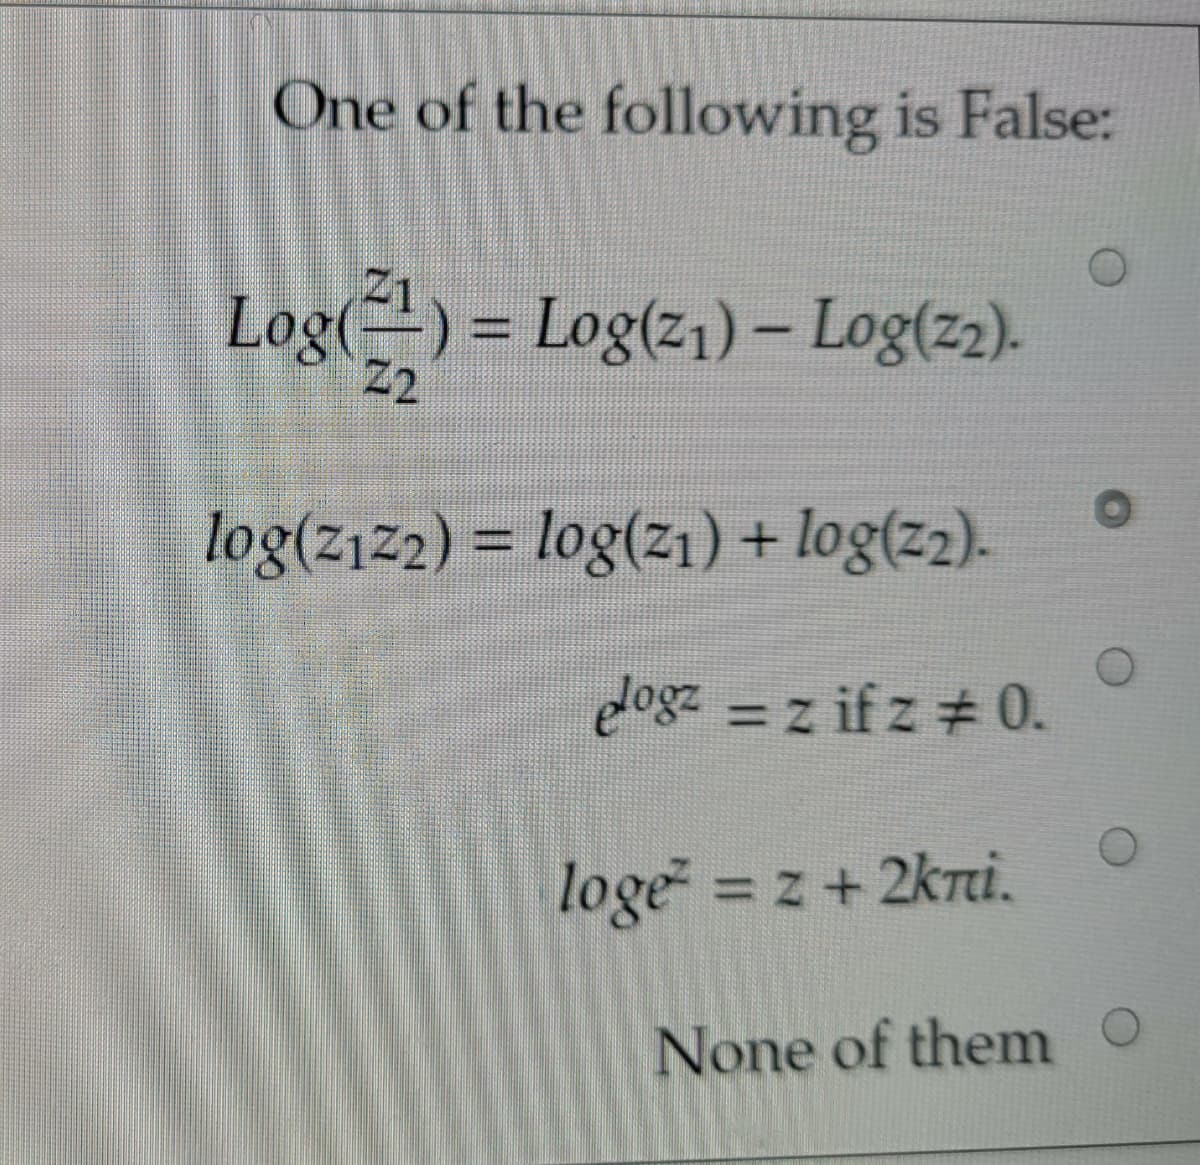 One of the following is False:
Log()
4) = Log(z1) – Log(z2).
2
%D
log(z1z2) = log(zı) + log(z2).
%3D
logz = z if z # 0.
loge = z+ 2kri.
None of them o
